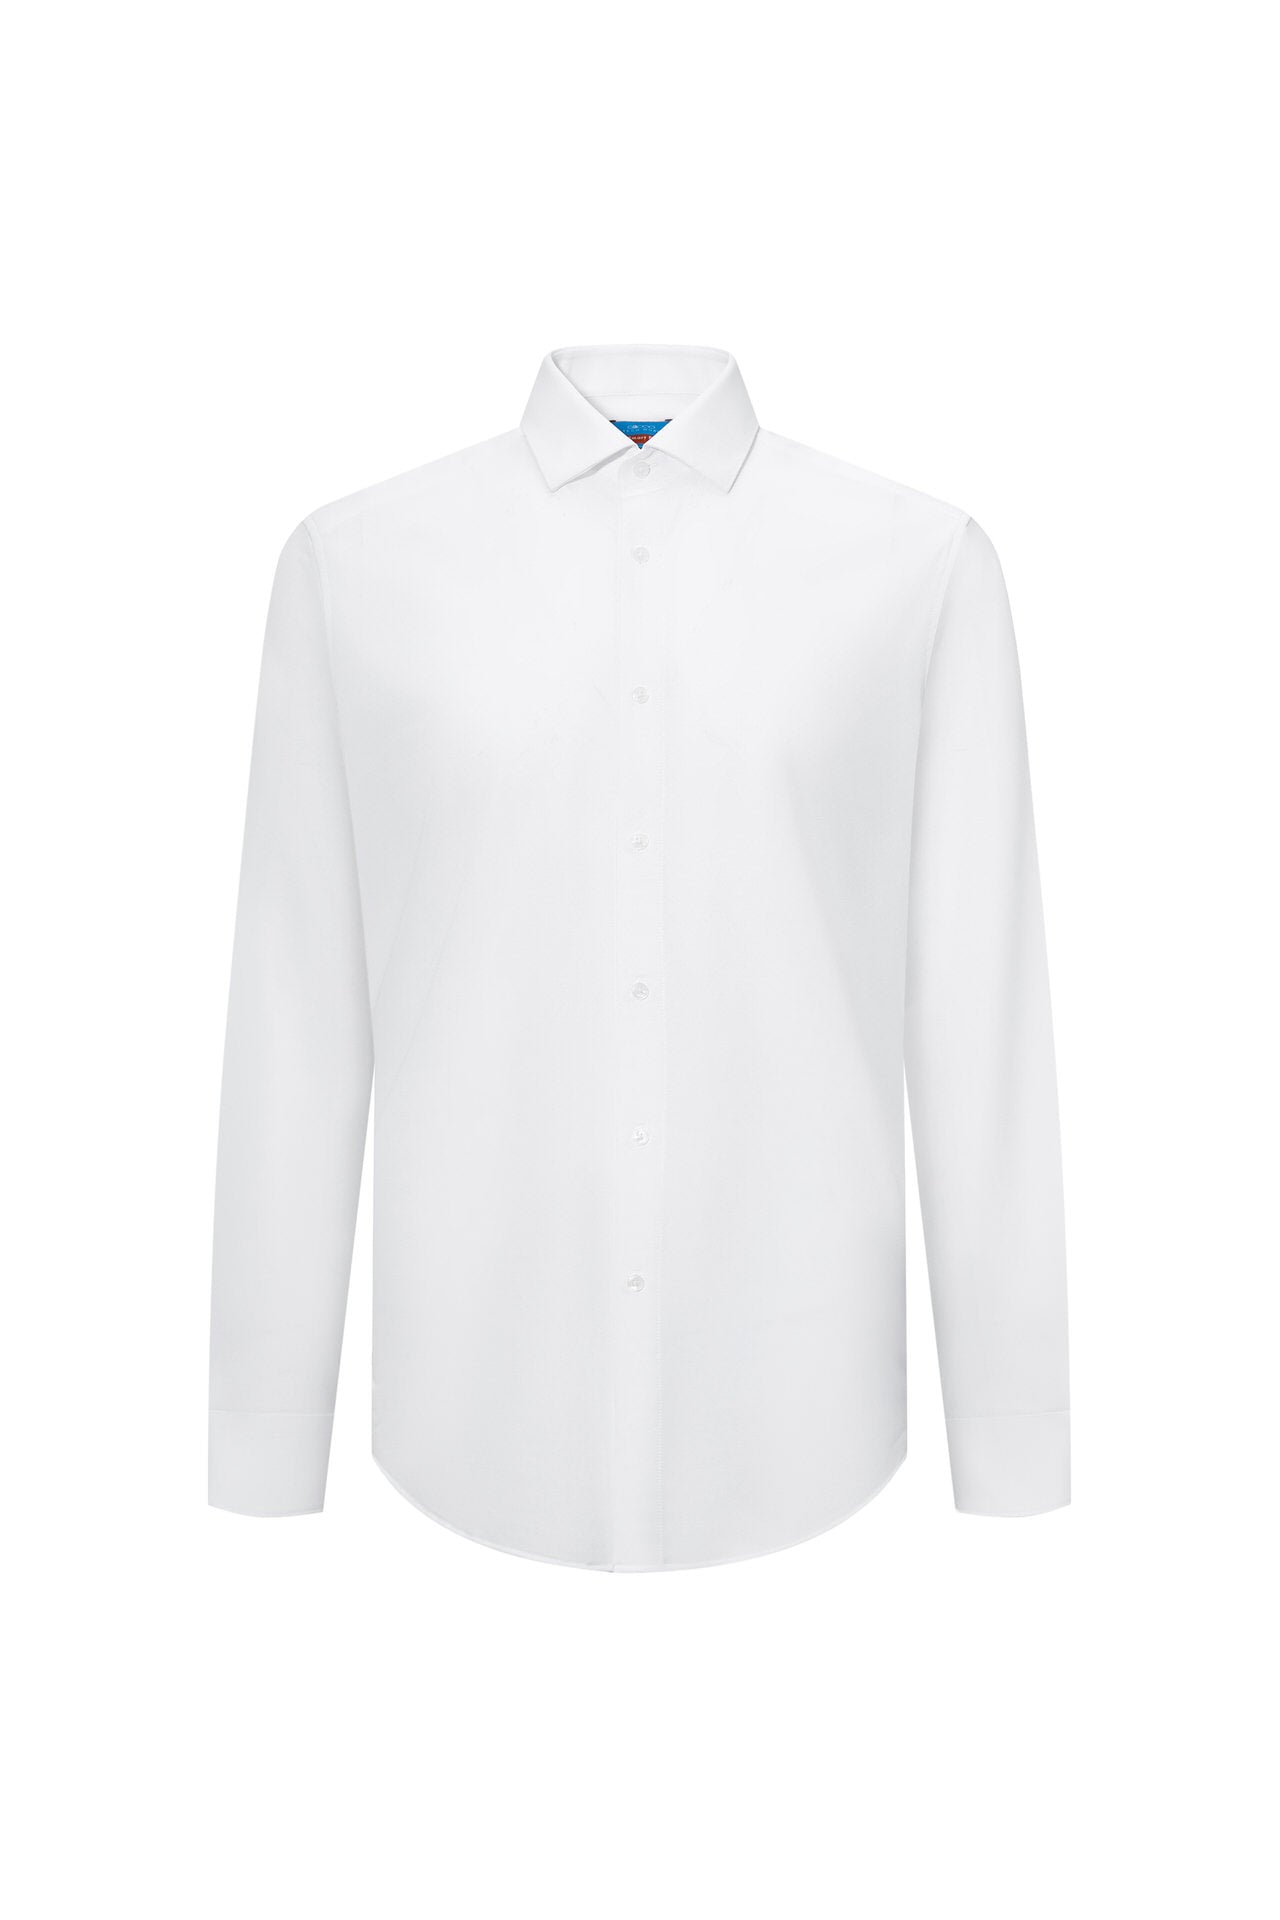 Dry Travel Shirt in Smart Fit